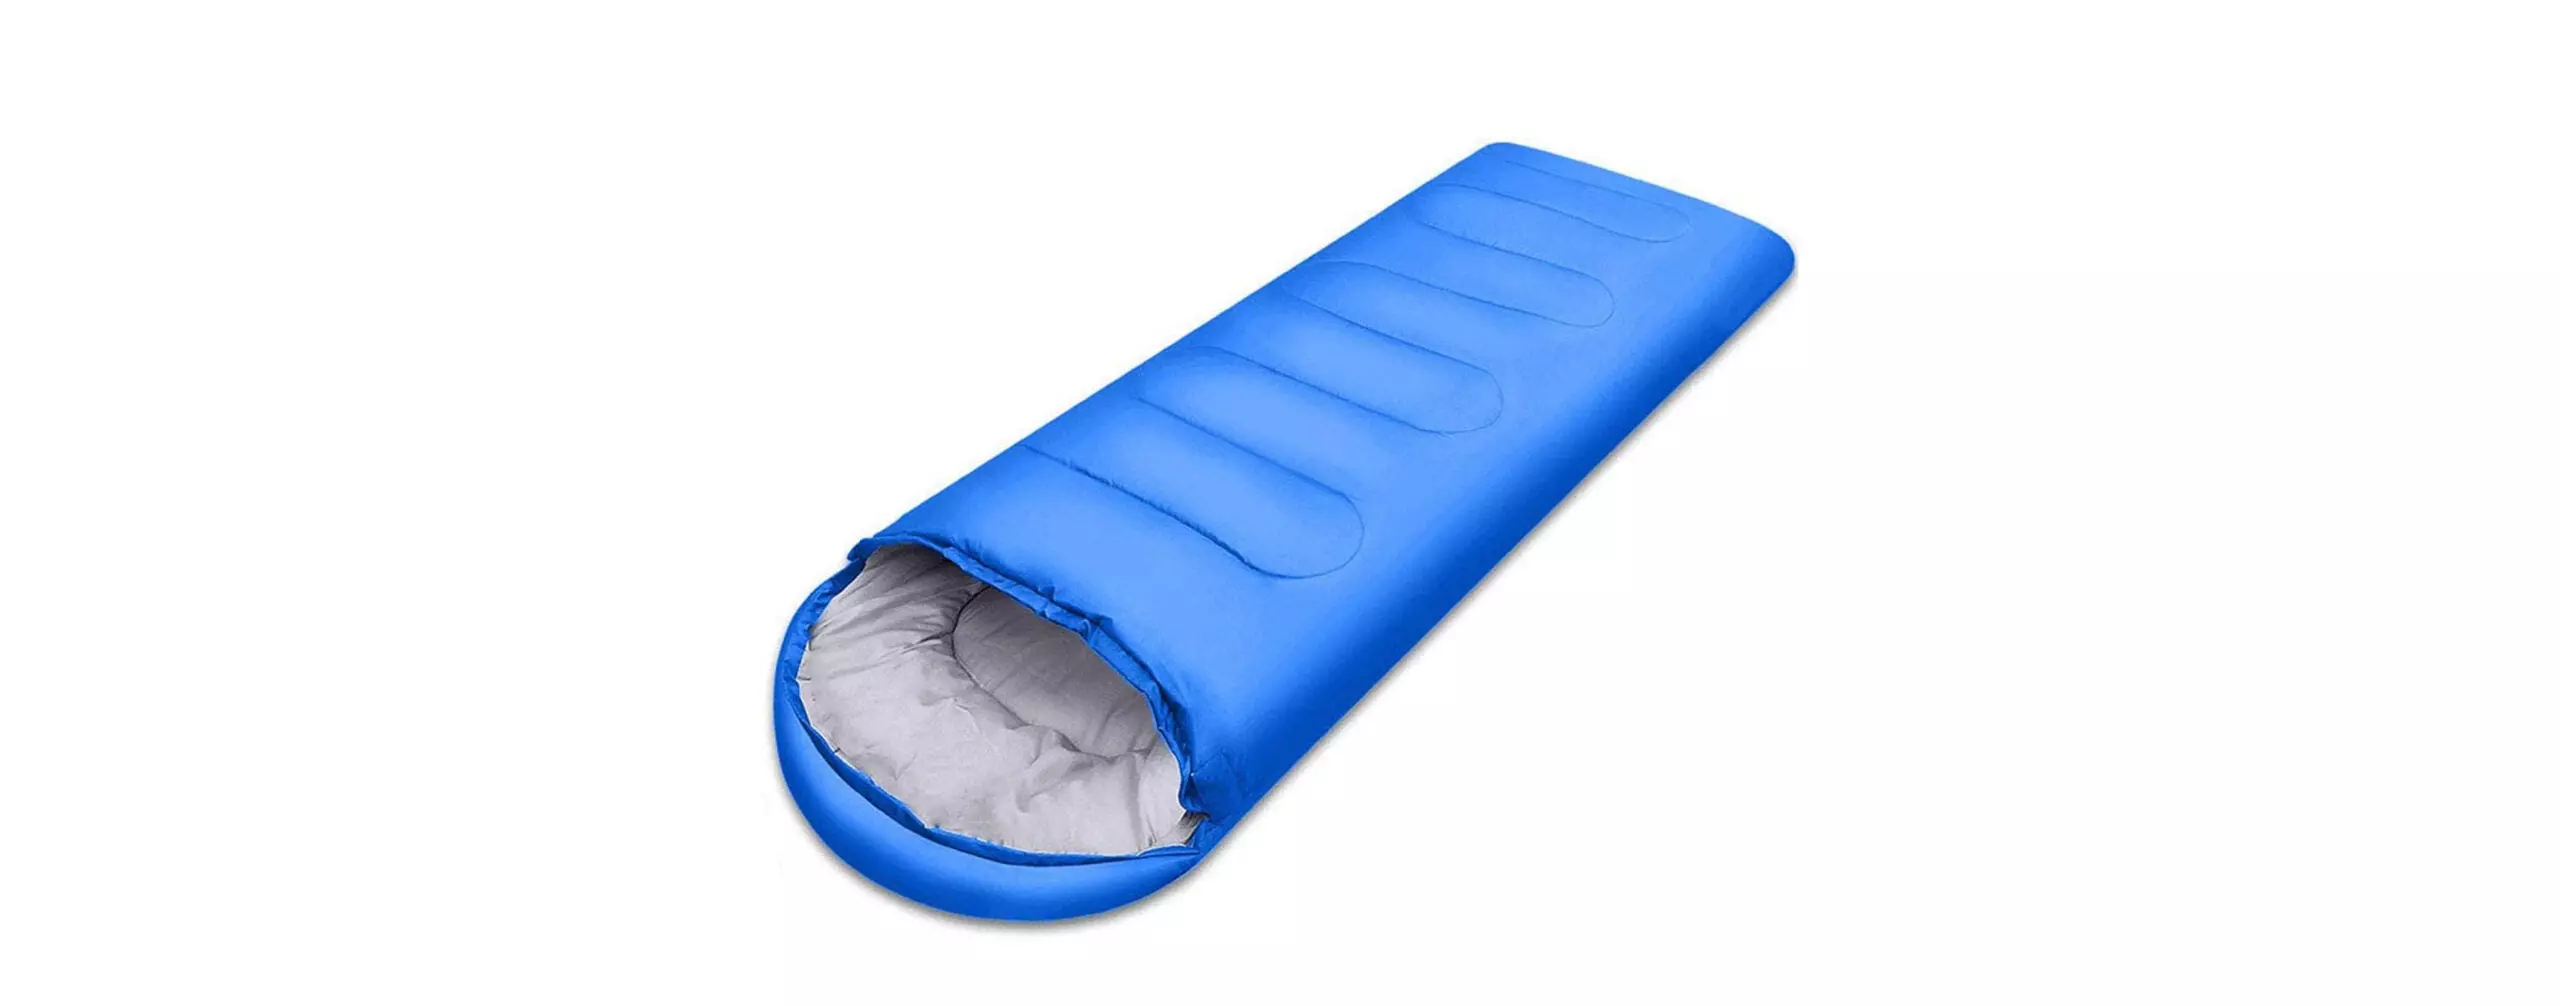 The Best Lightweight Sleeping Bags (Review and Buying Guide) of 2021